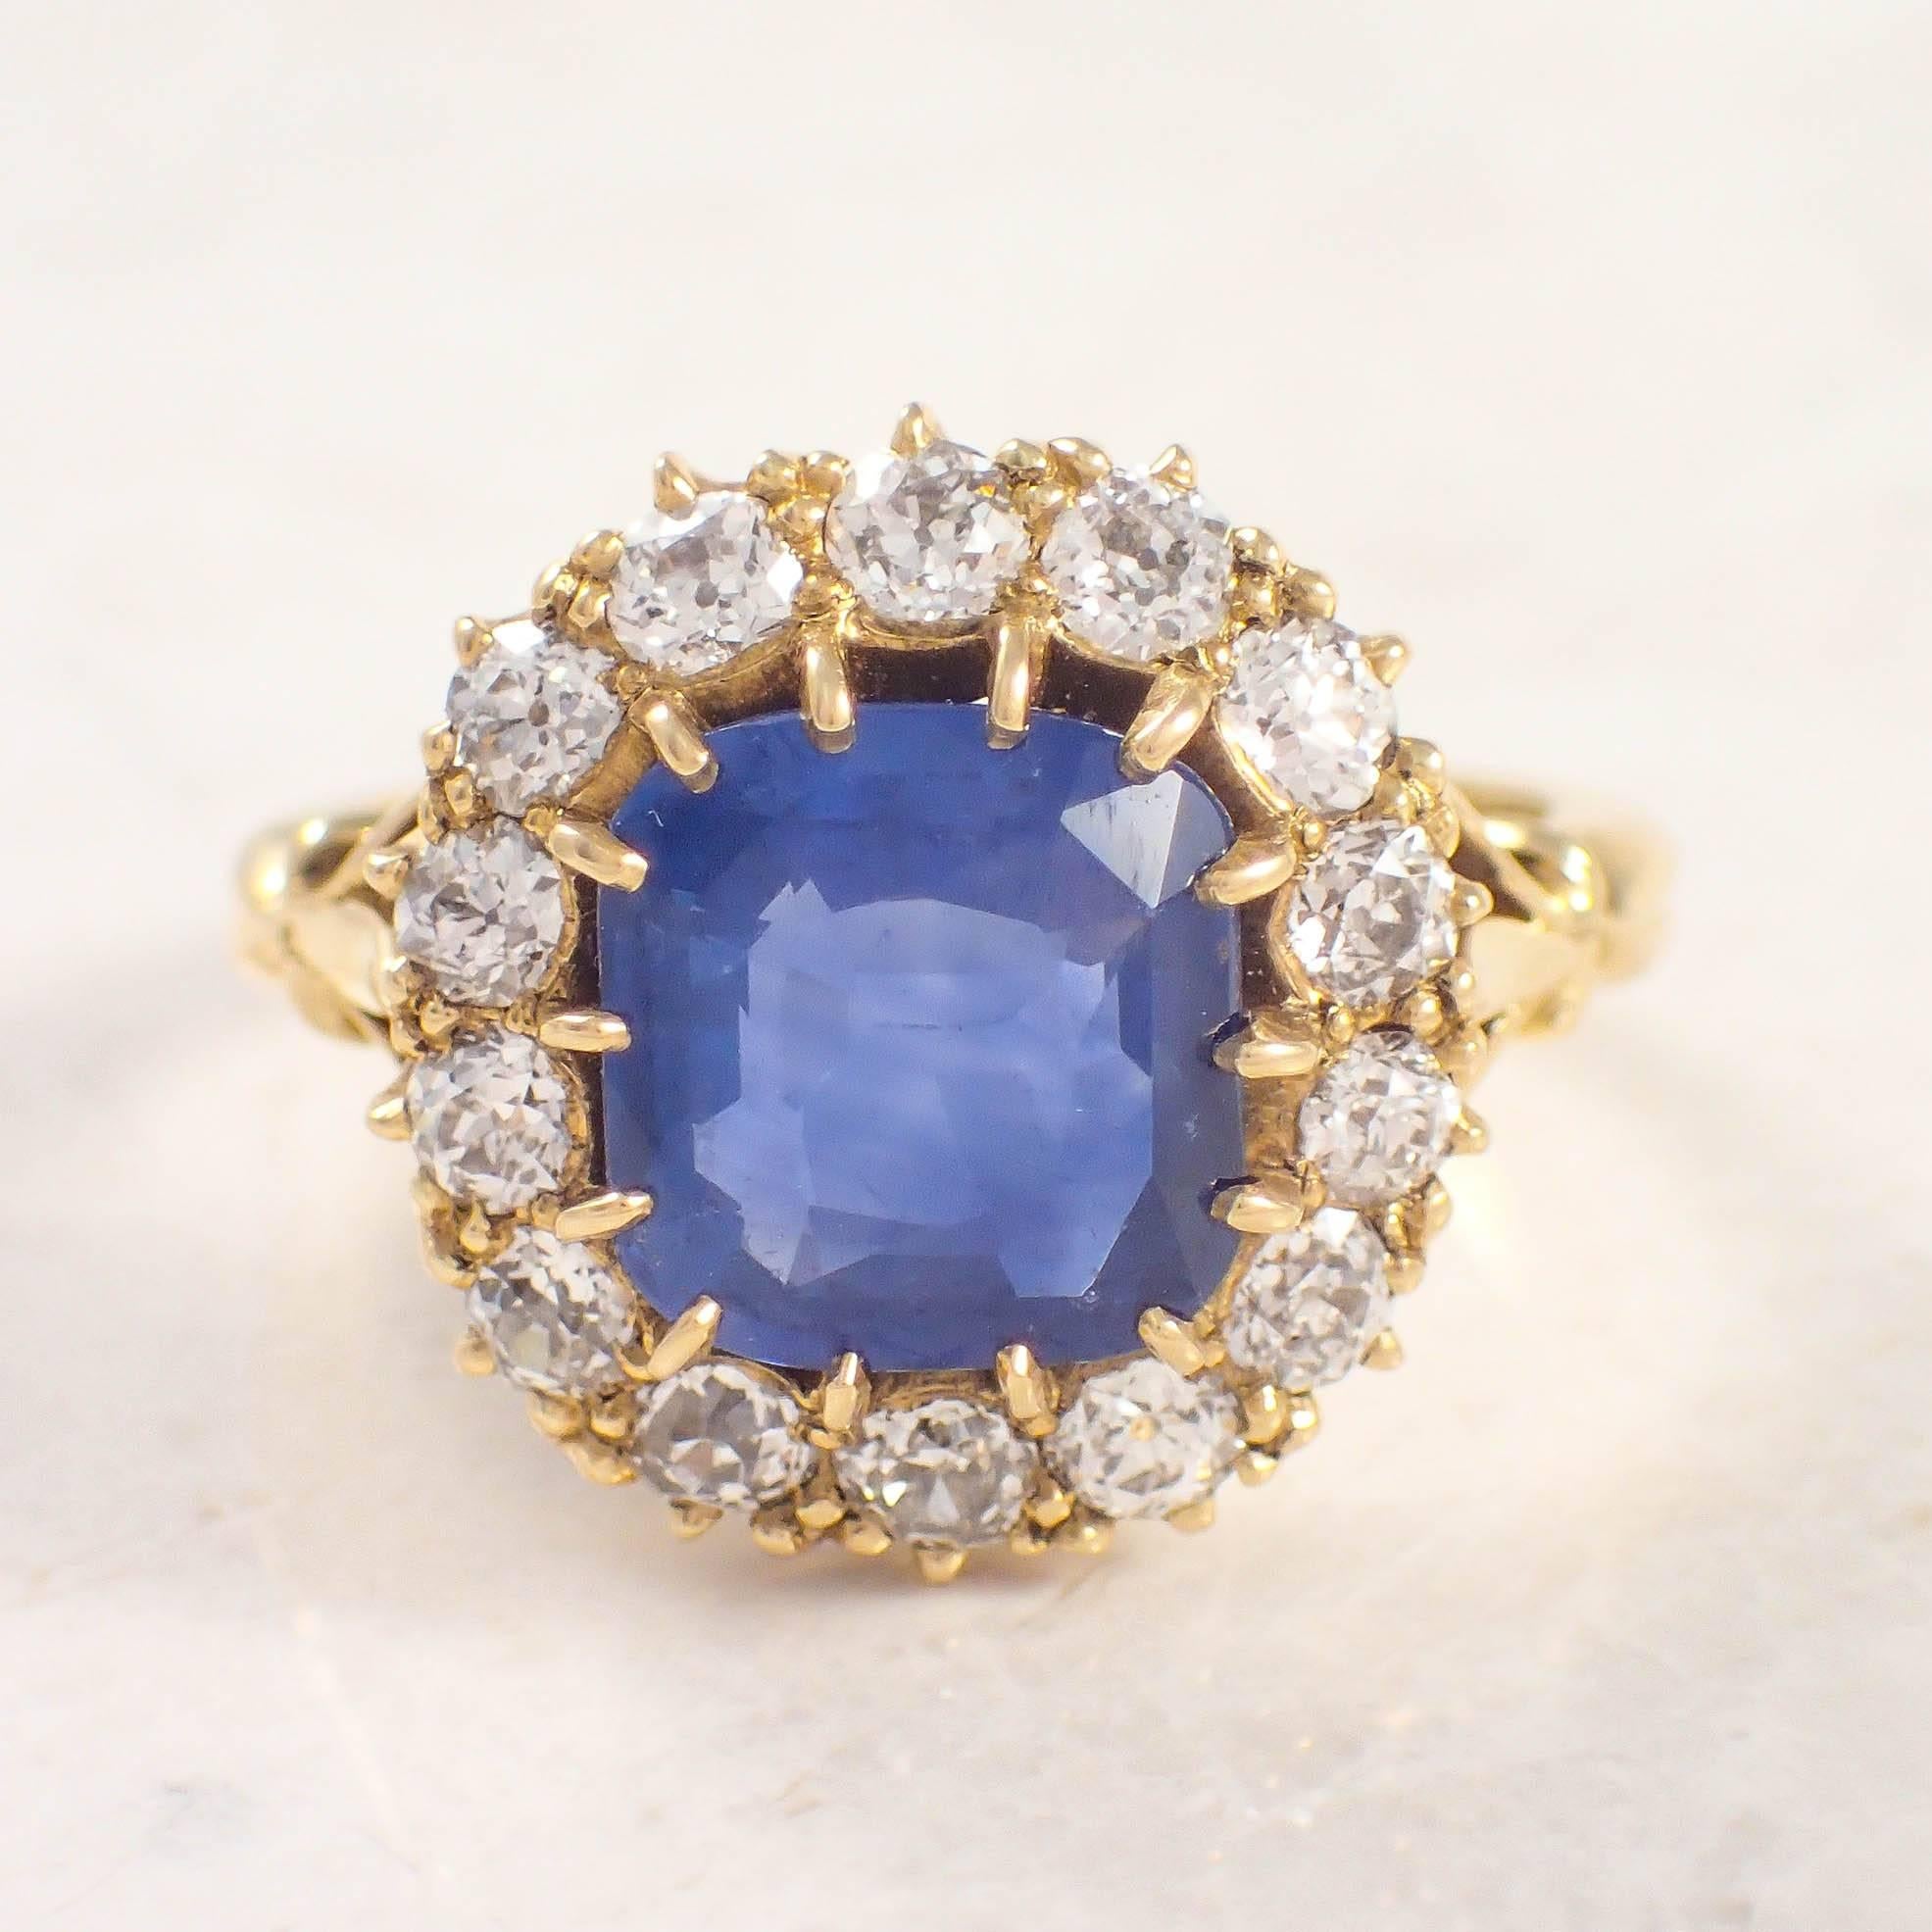 18K Yellow gold sapphire and diamond ring. The cluster style ring is centered with a 3.21 carat cushion cut sapphire, accented by 14 diamonds weighing approximately 1.14 carats total. Circa 1890s.

Color: H-I
Clarity: SI